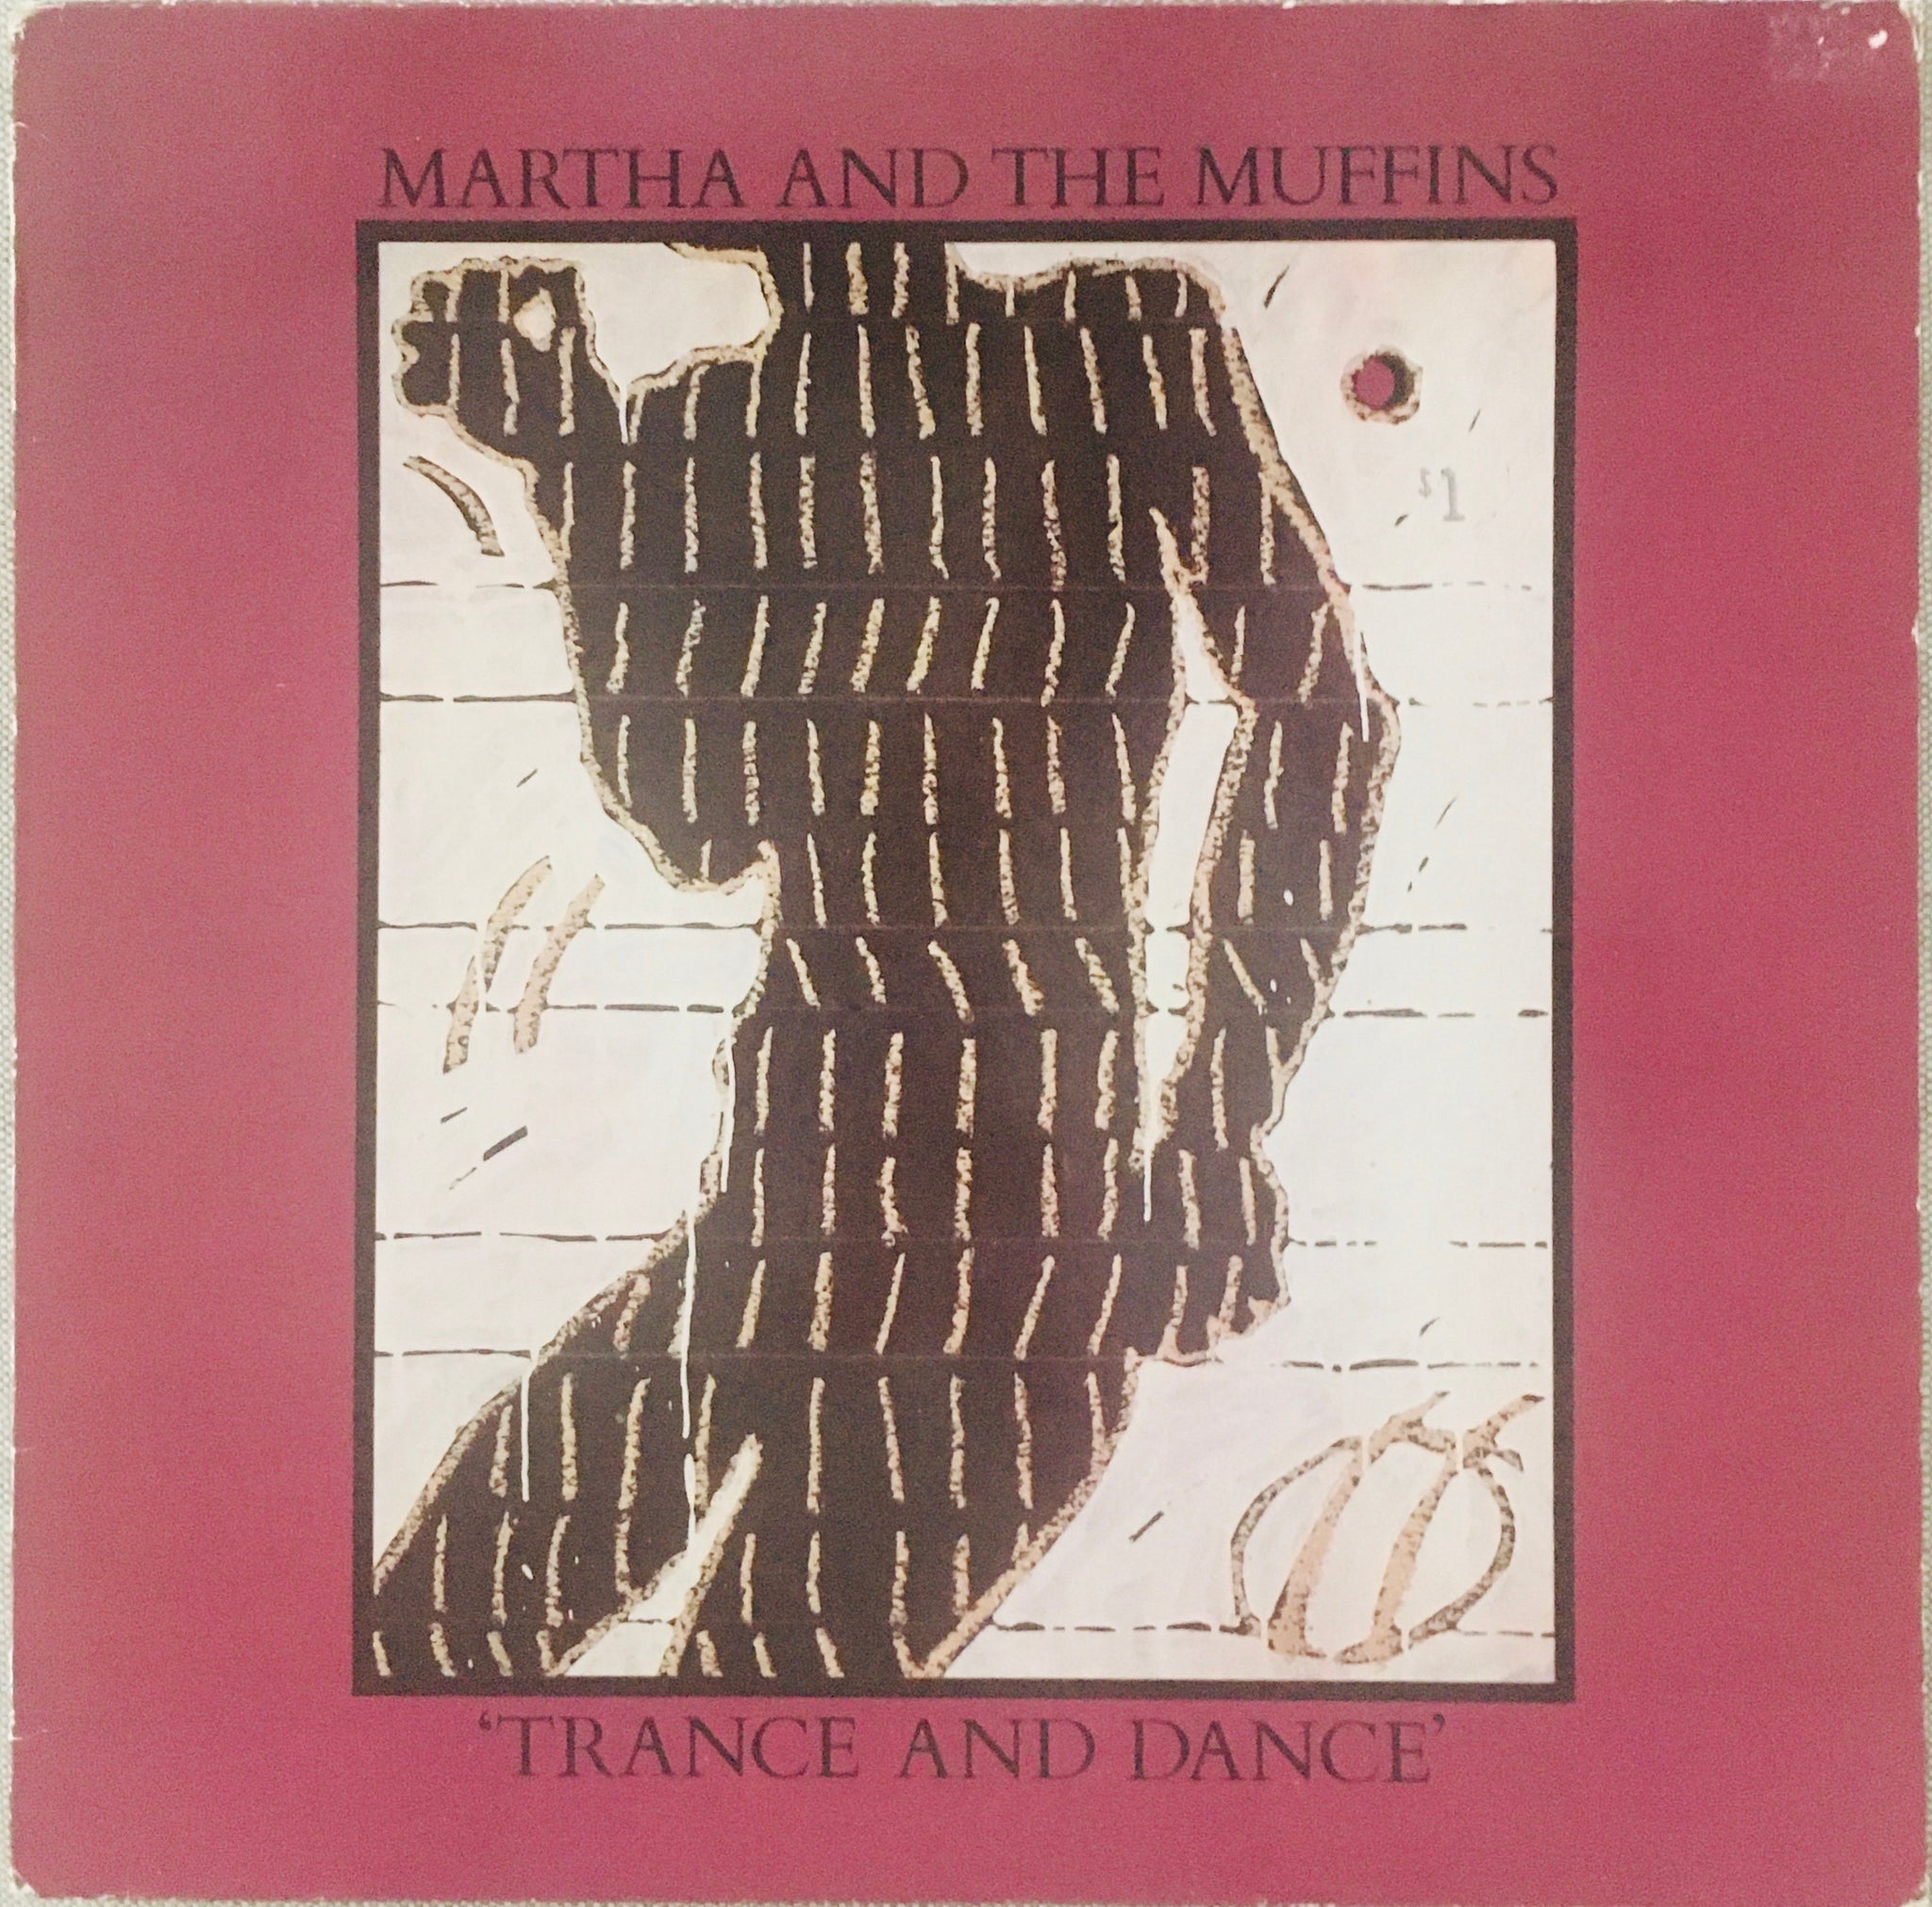 Martha & The Muffins “Trance and Dance” LP (1980)